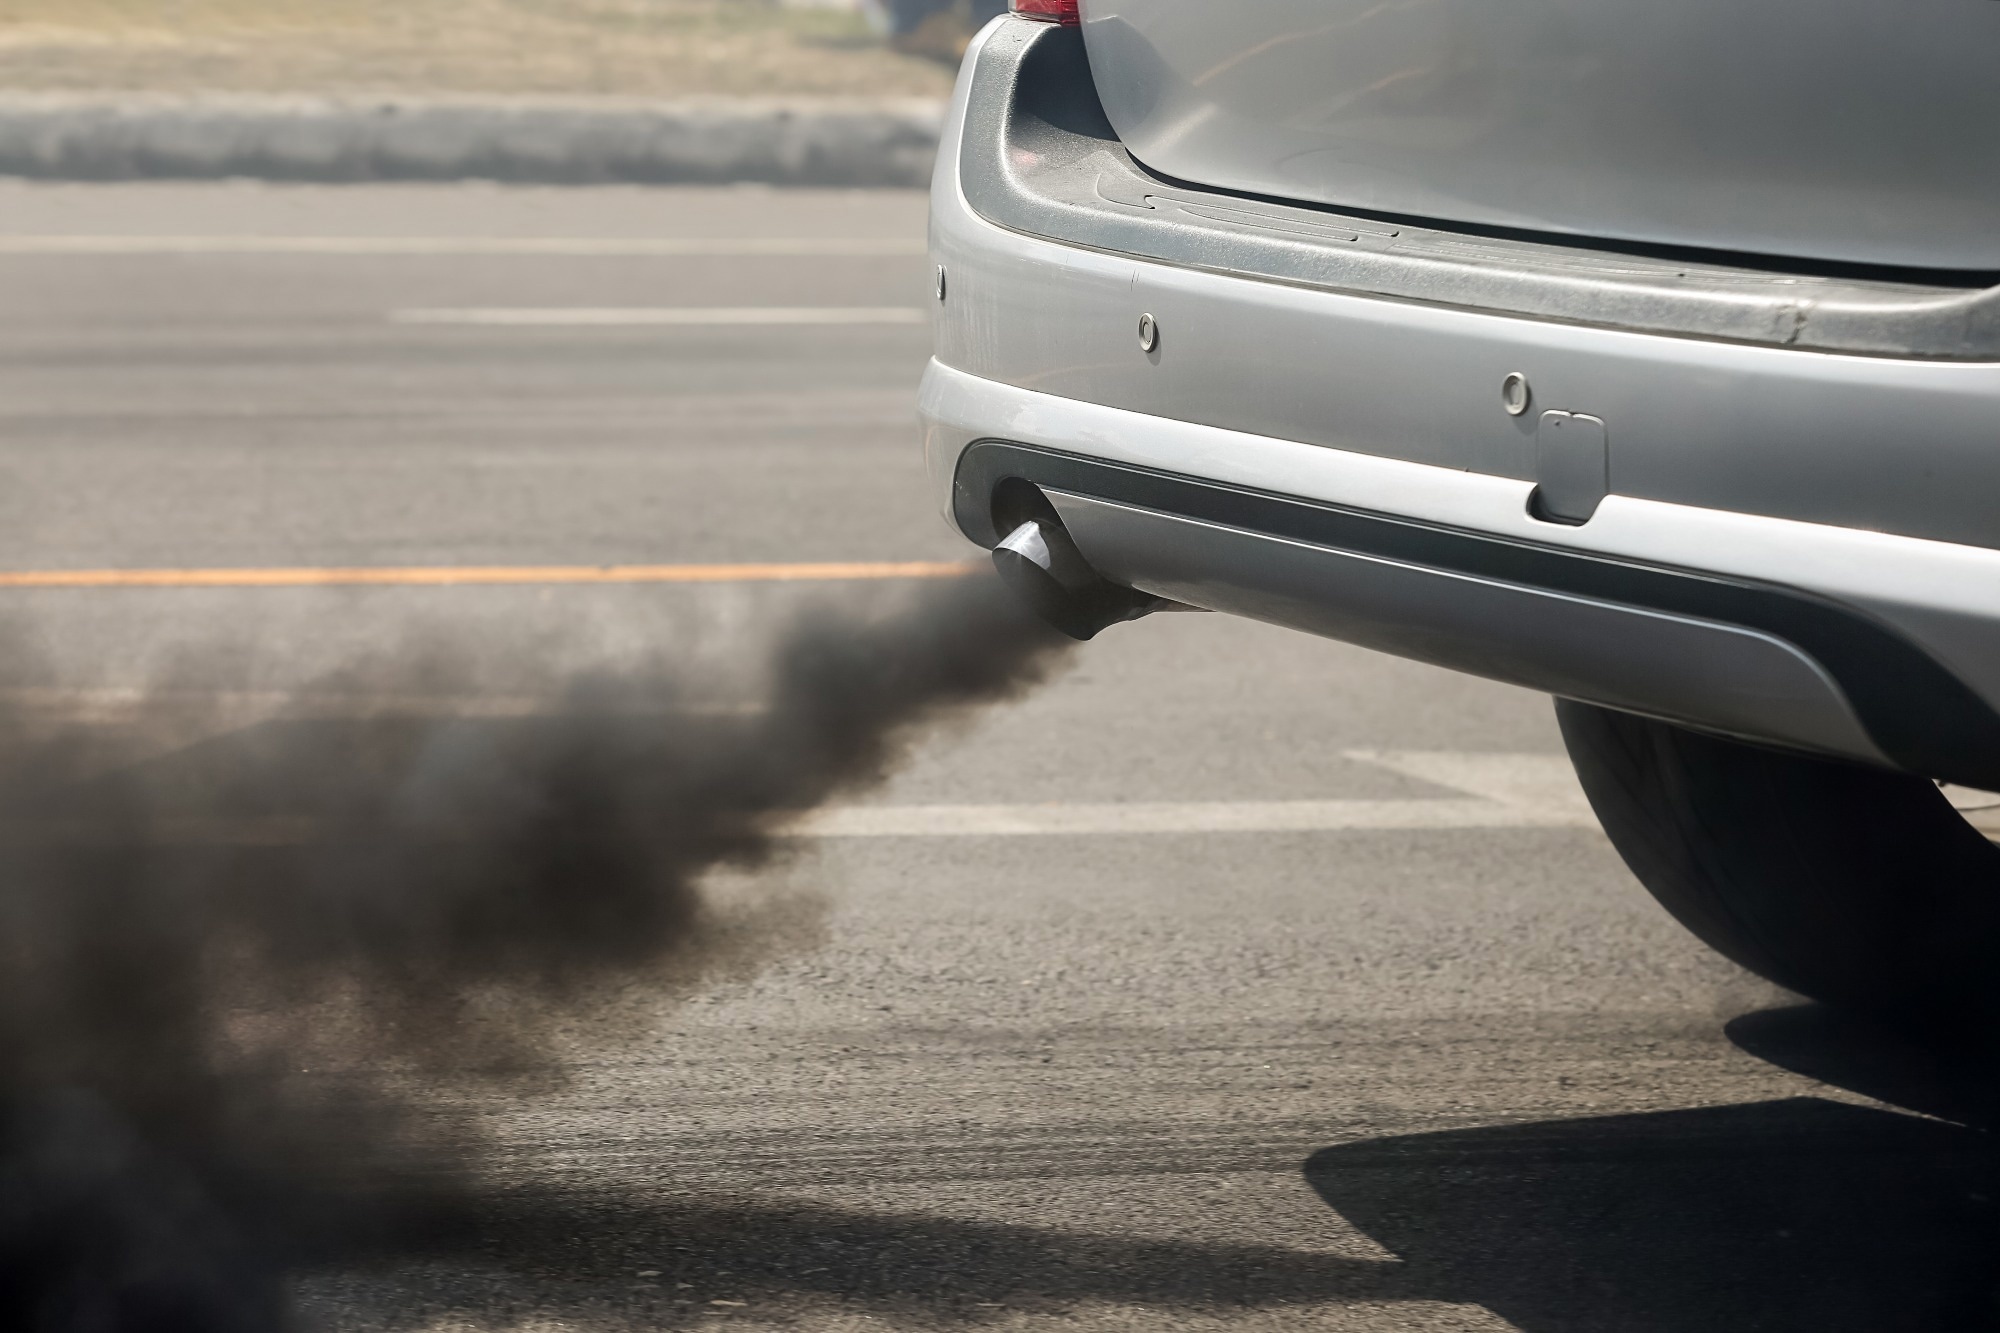 Study: Air pollution is associated with abnormal left ventricular diastolic function: a nationwide population-based study. Image Credit: Toa55/Shutterstock.com